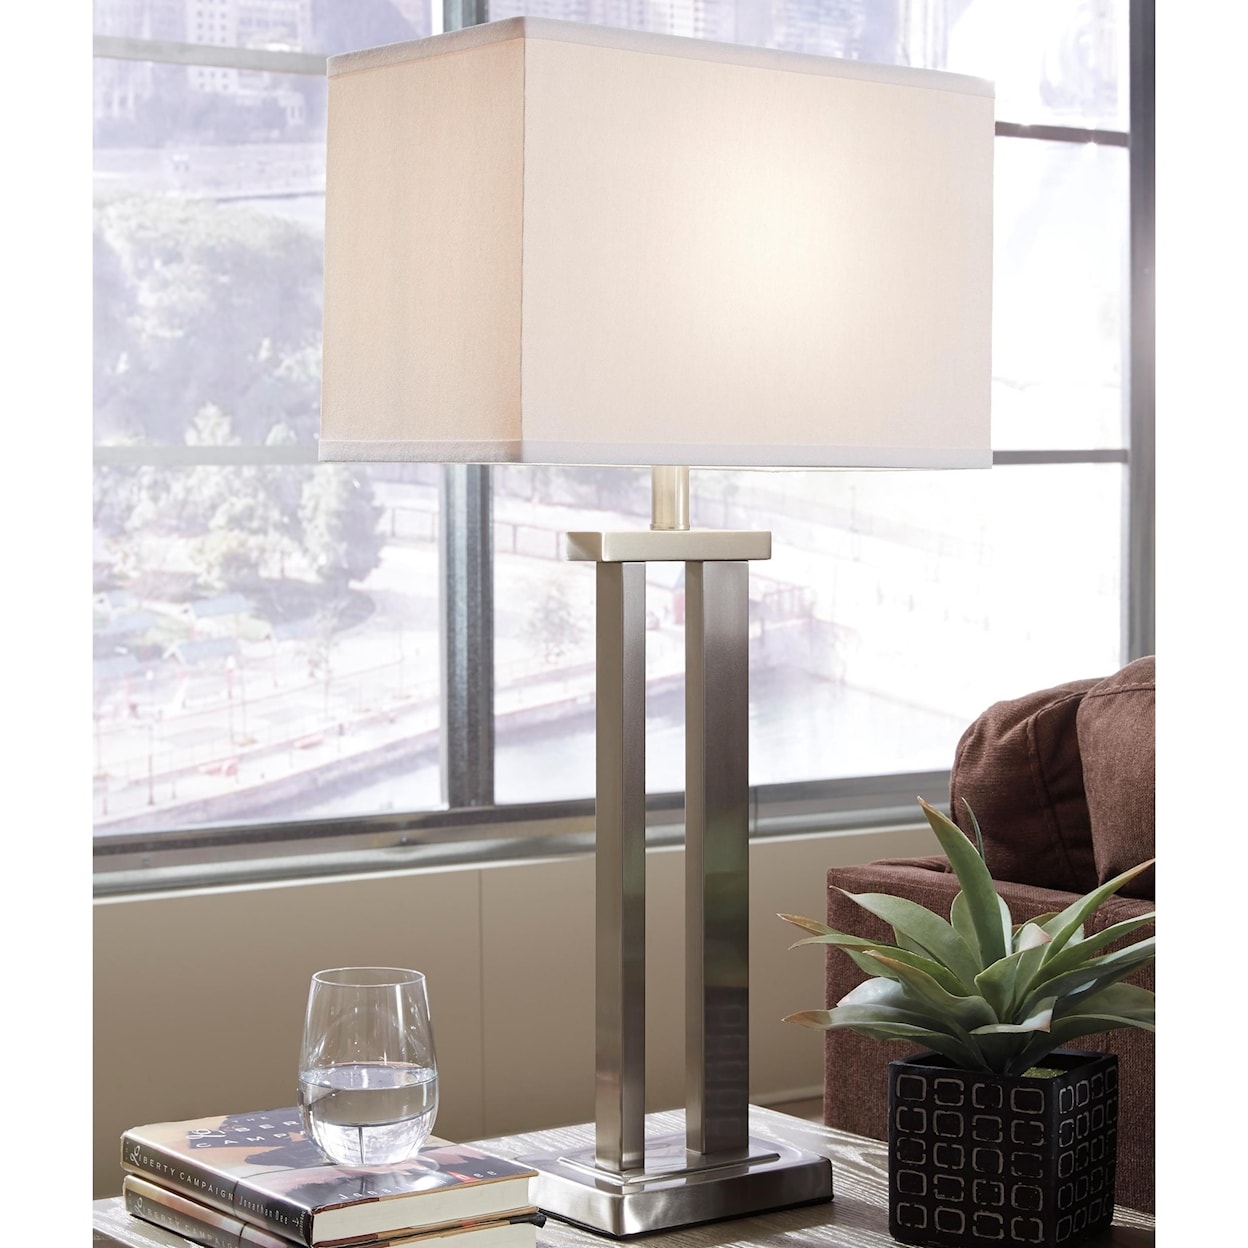 Signature Design by Ashley Furniture Lamps - Contemporary Aniela Metal Table Lamp